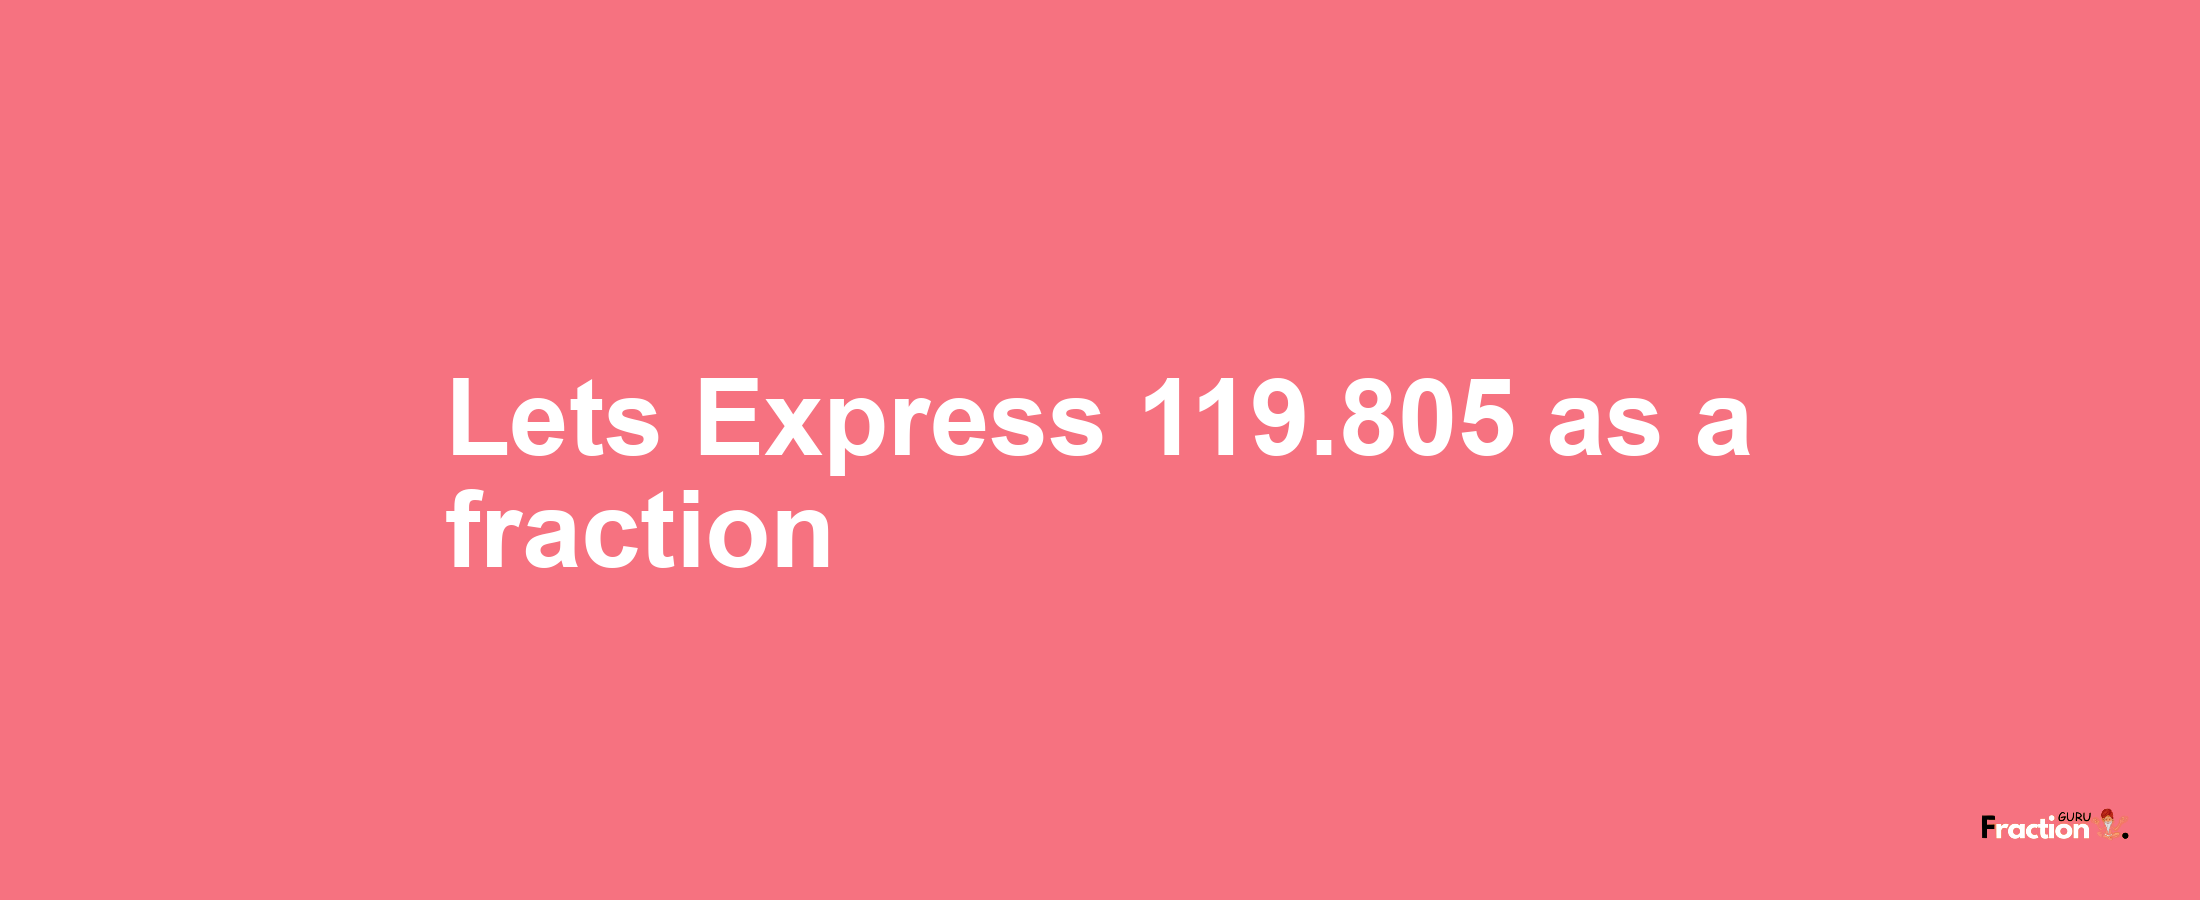 Lets Express 119.805 as afraction